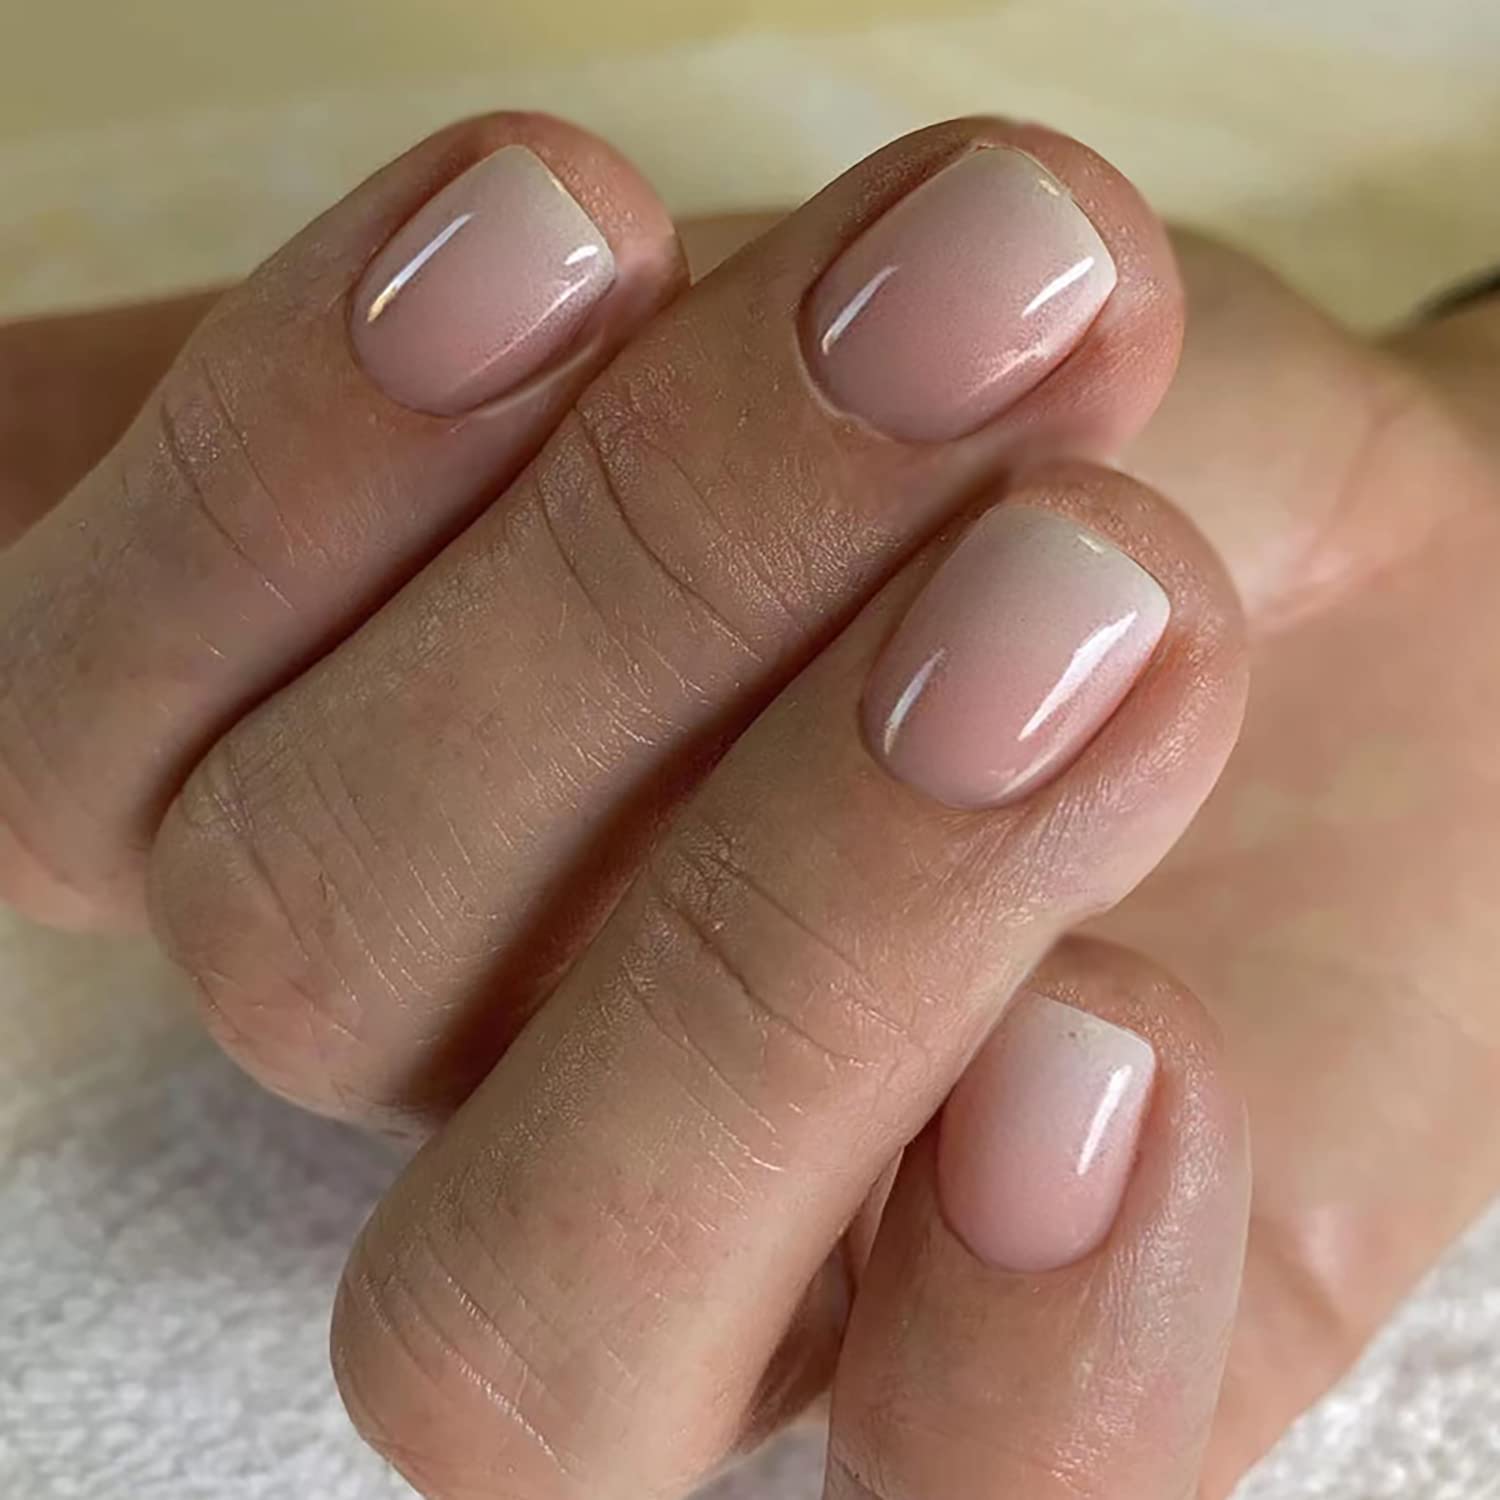 Is it okay for men to wear fake, long, neutral colored nails? - Quora